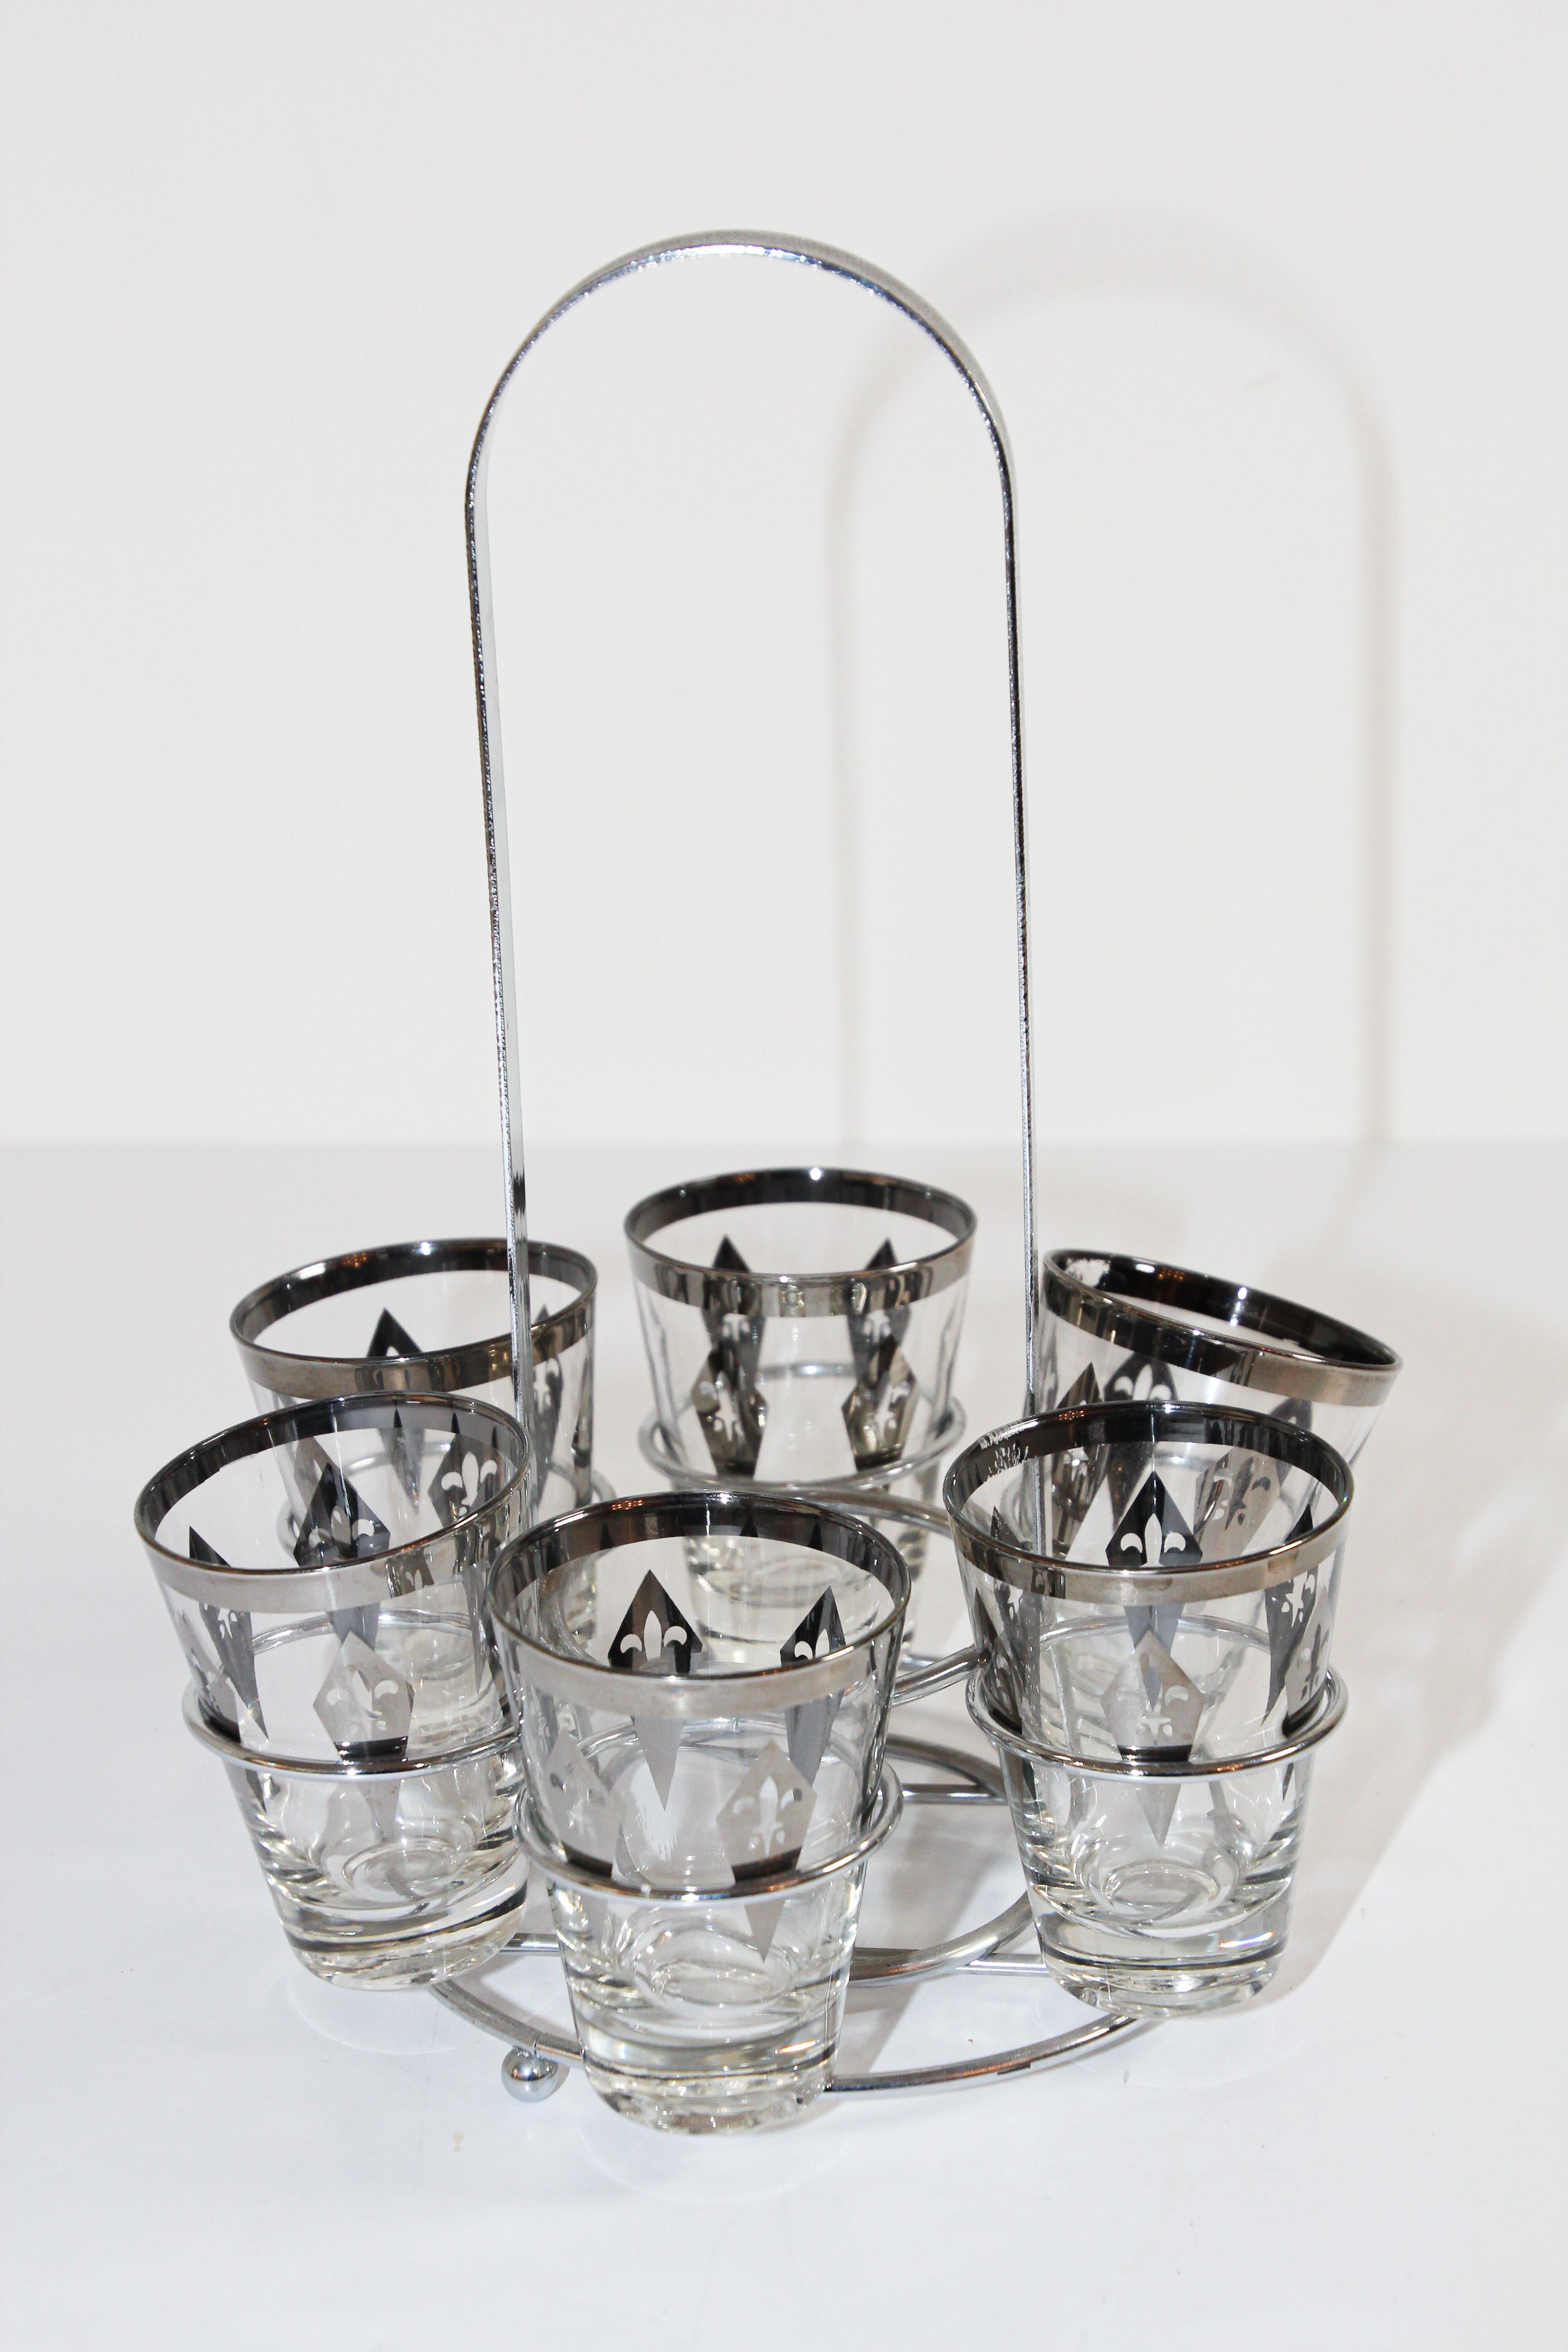 Elegant exquisite vintage set of six shot glasses designed with chrome carrying caddy.
The glasses are decorated with silver rimmed and a fleur-de-lys design.
Fantastic midcentury vintage glasses in excellent vintage condition.
Each glass